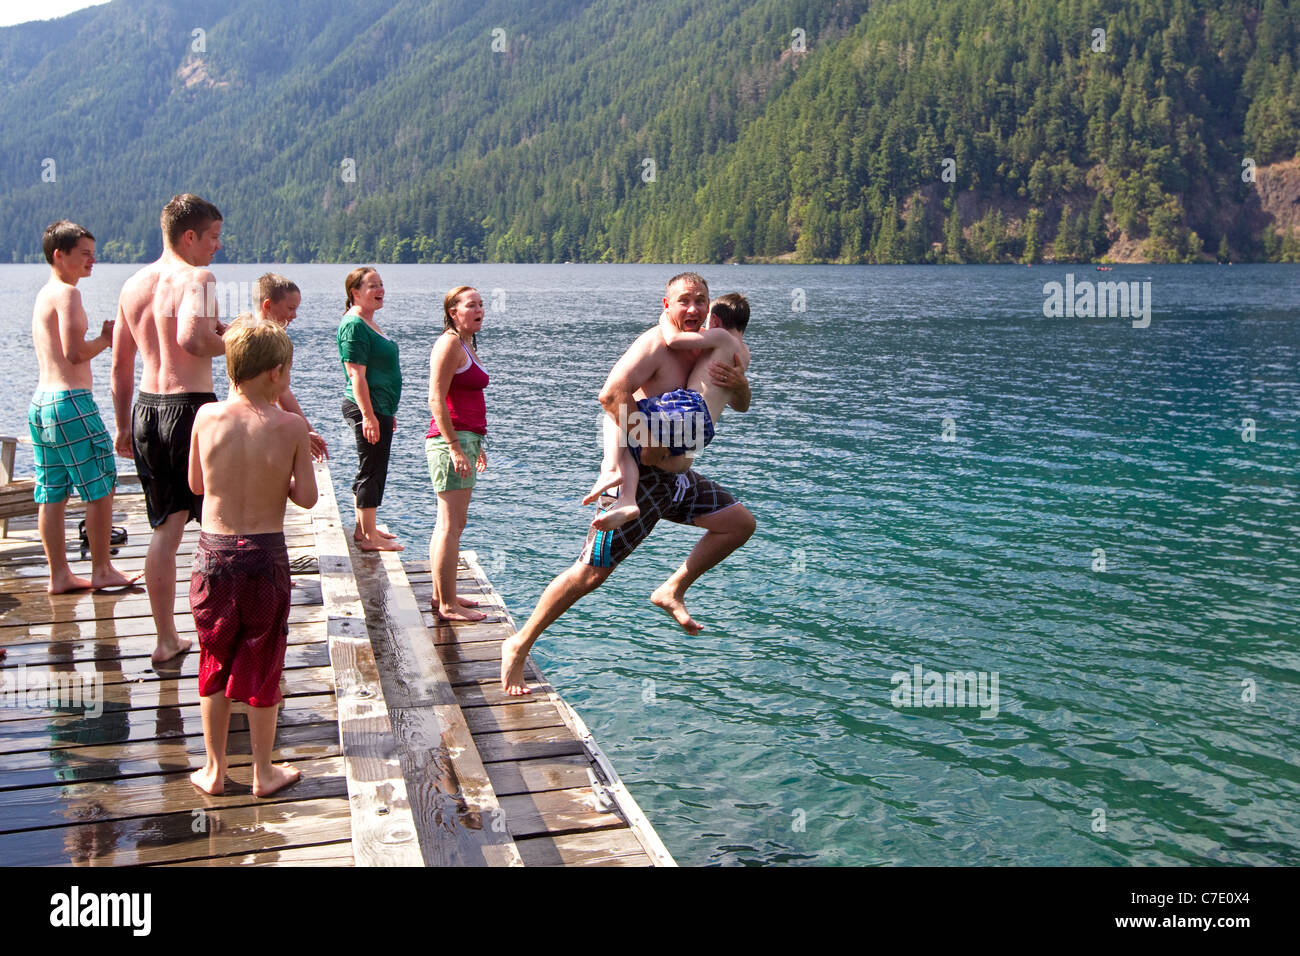 Father leaps into lake water with son, summer fun family Stock Photo